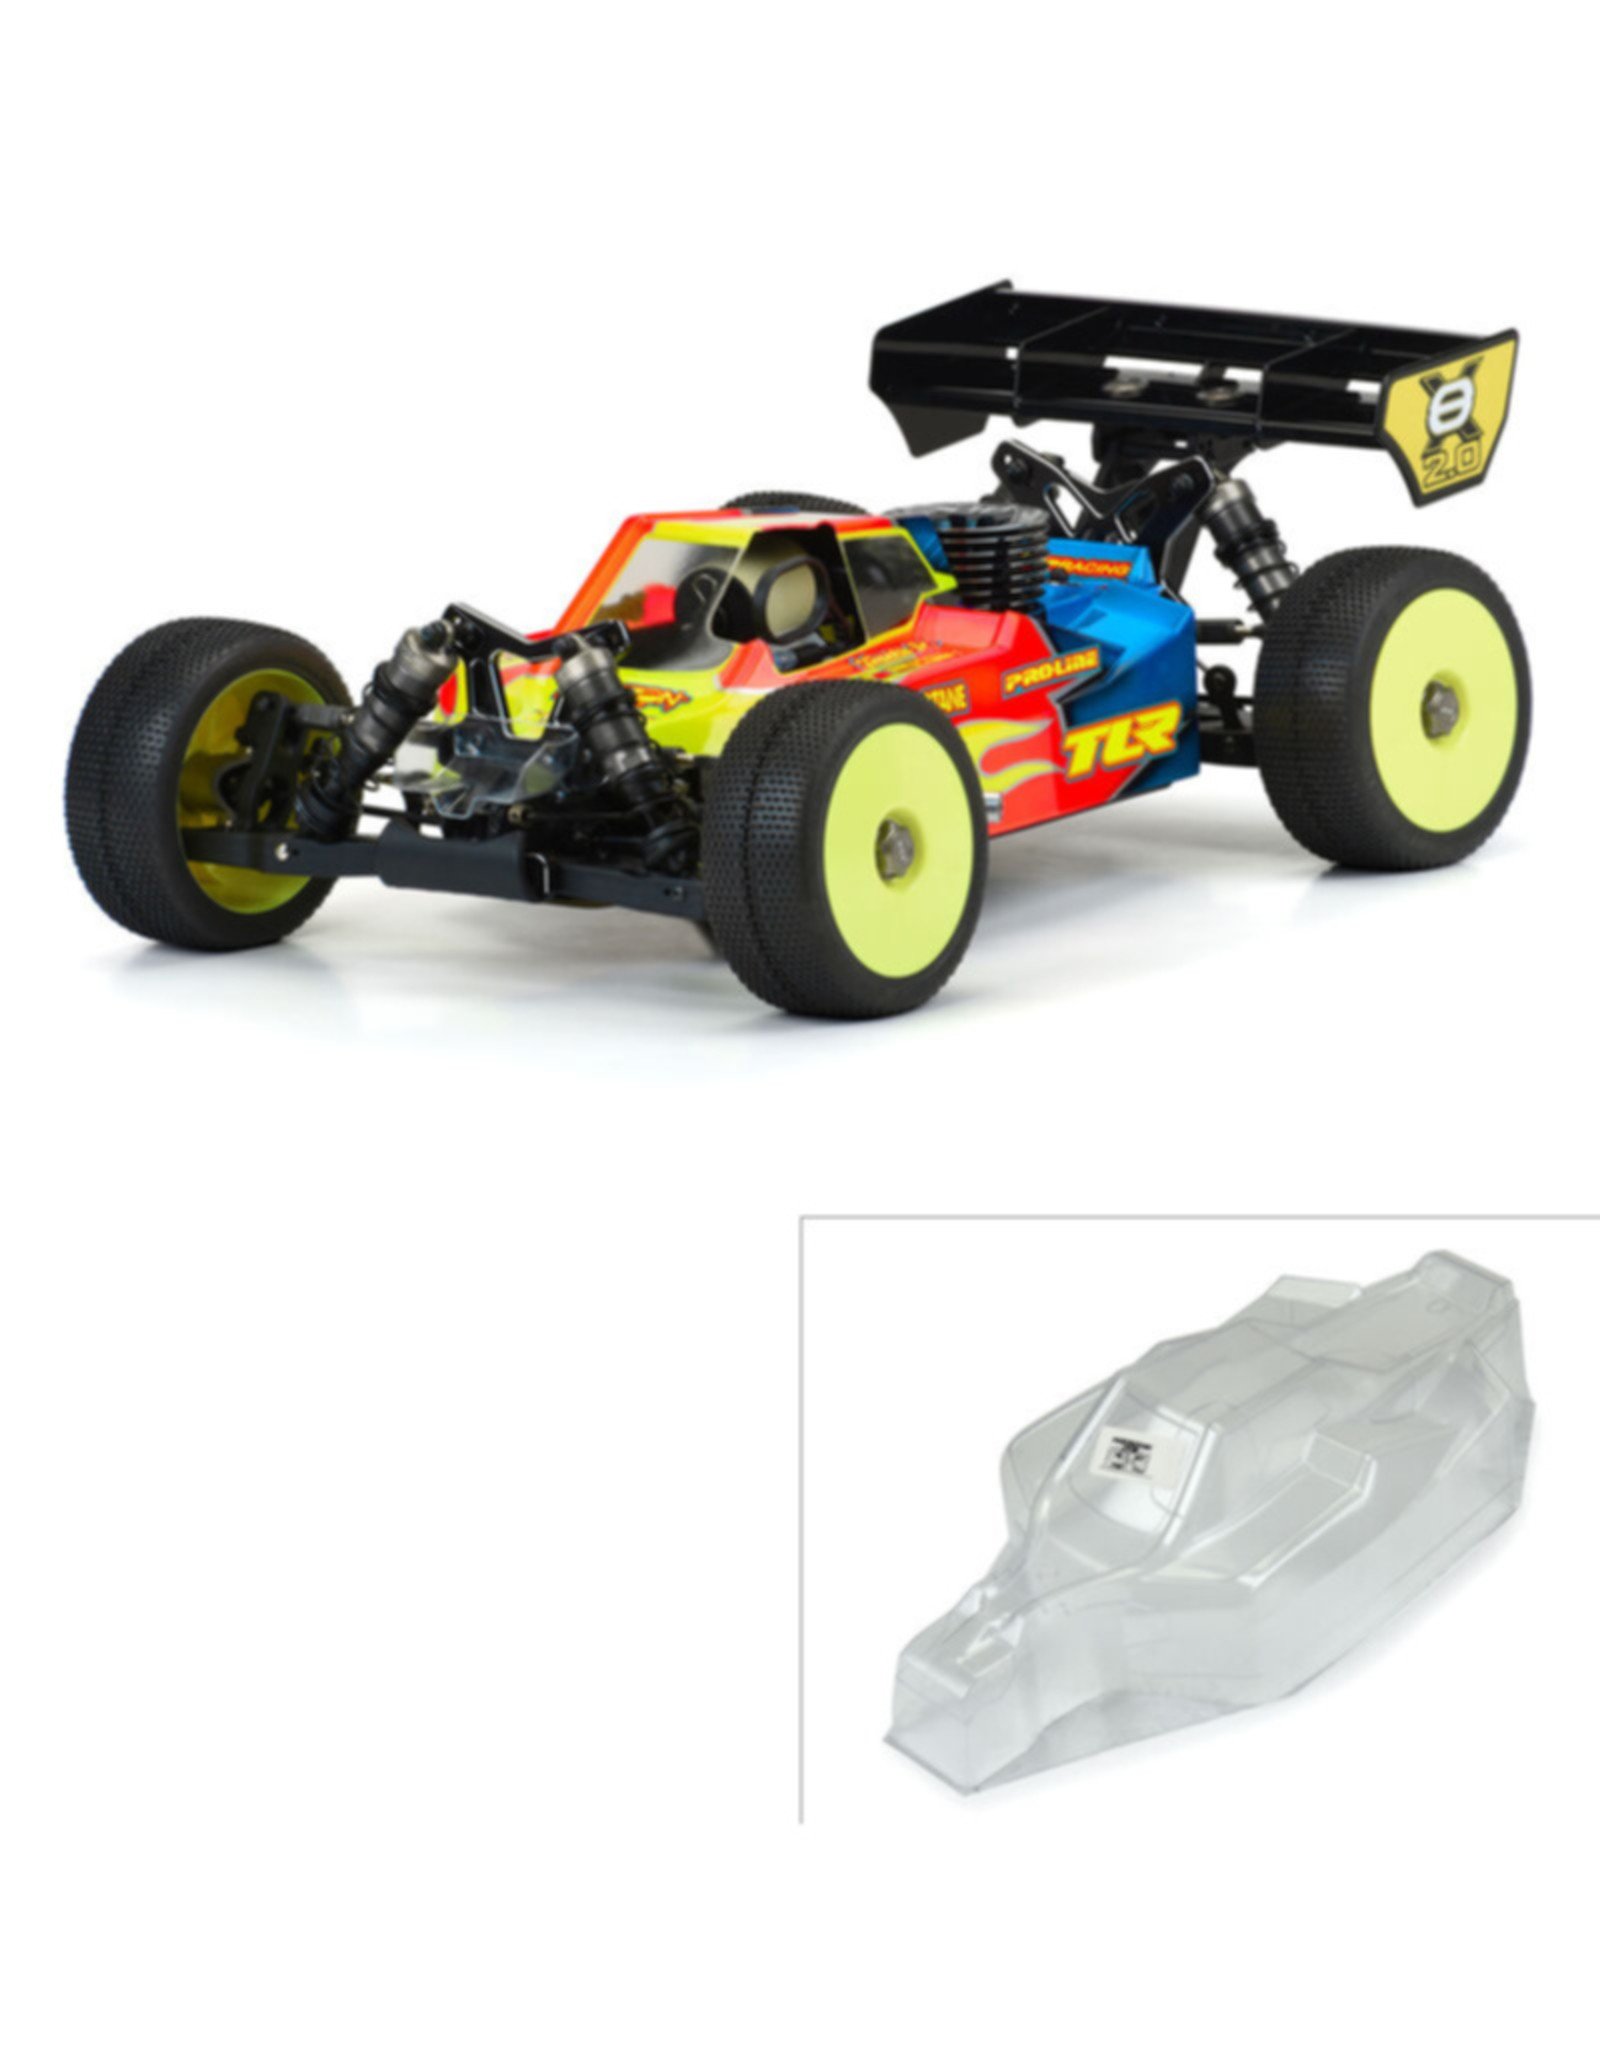 Pro-Line Racing PRO360300 1/8 Axis Clear Body for TLR 8ight-X/E 2.0